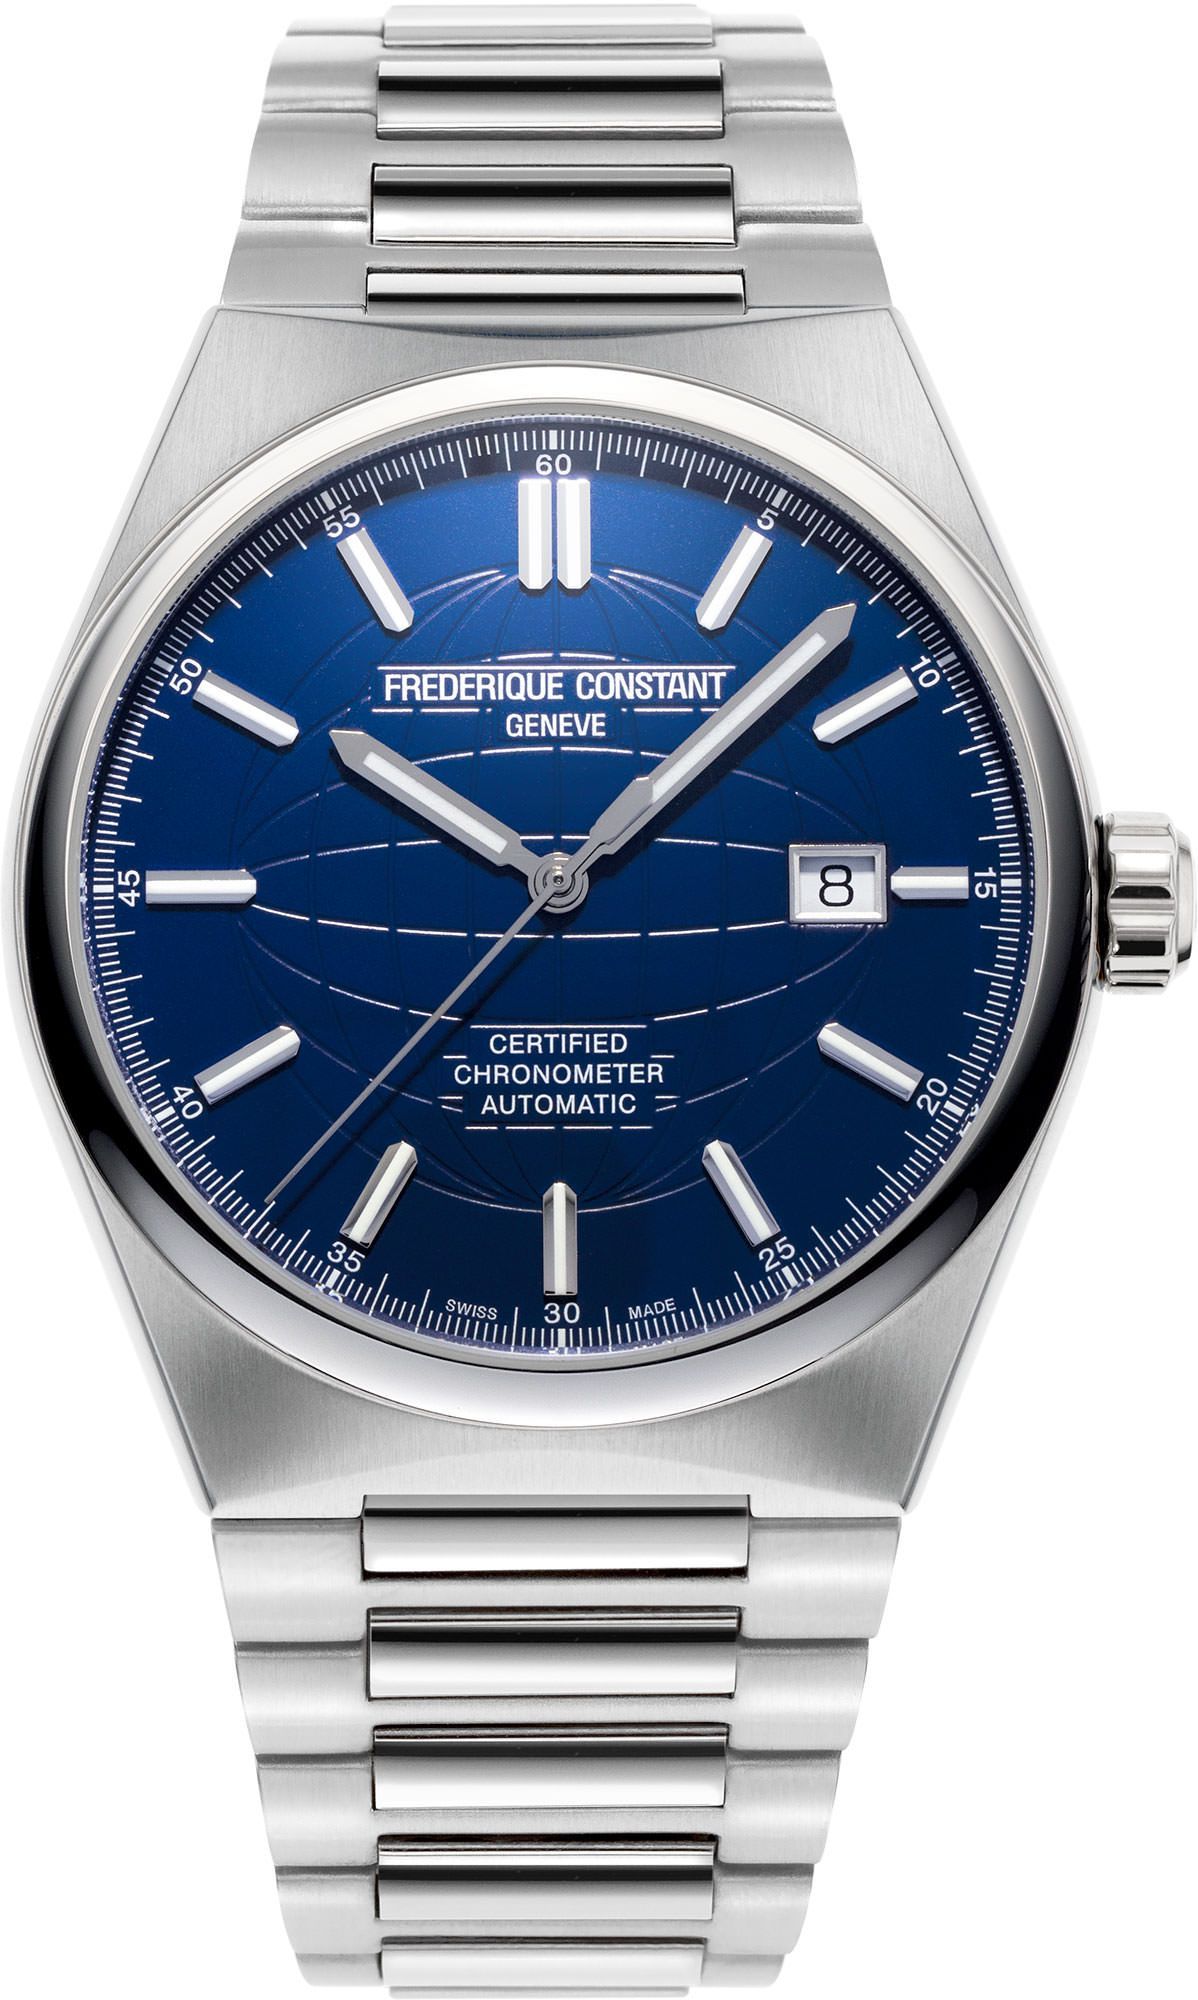 Frederique Constant Highlife Highlife Automatic COSC Blue Dial 41 mm Automatic Watch For Men - 1